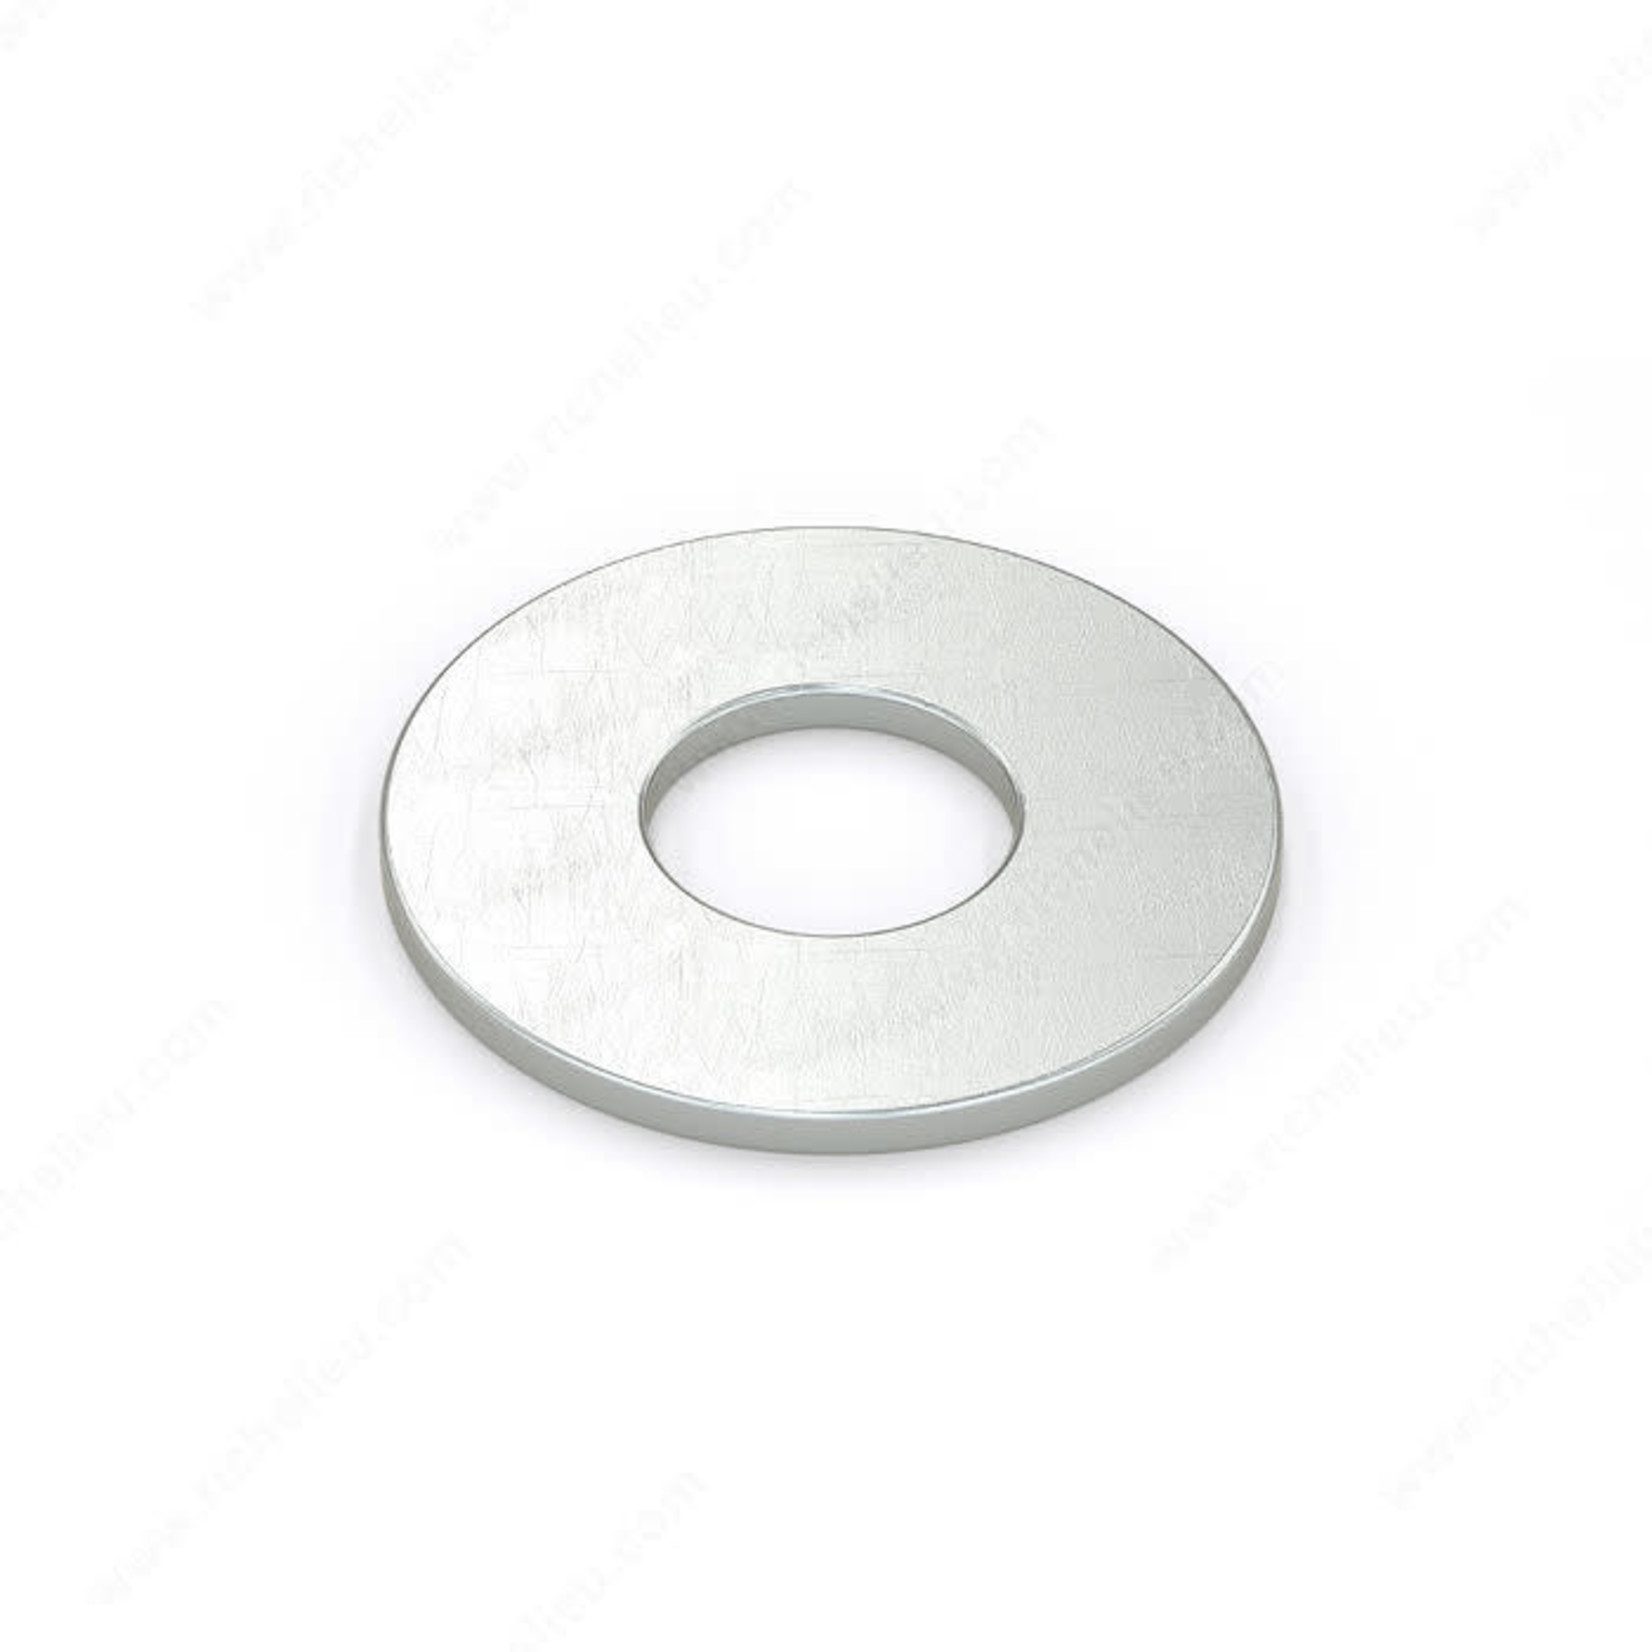 RELIABLE FLAT WASHER 3/8IN, 75PK